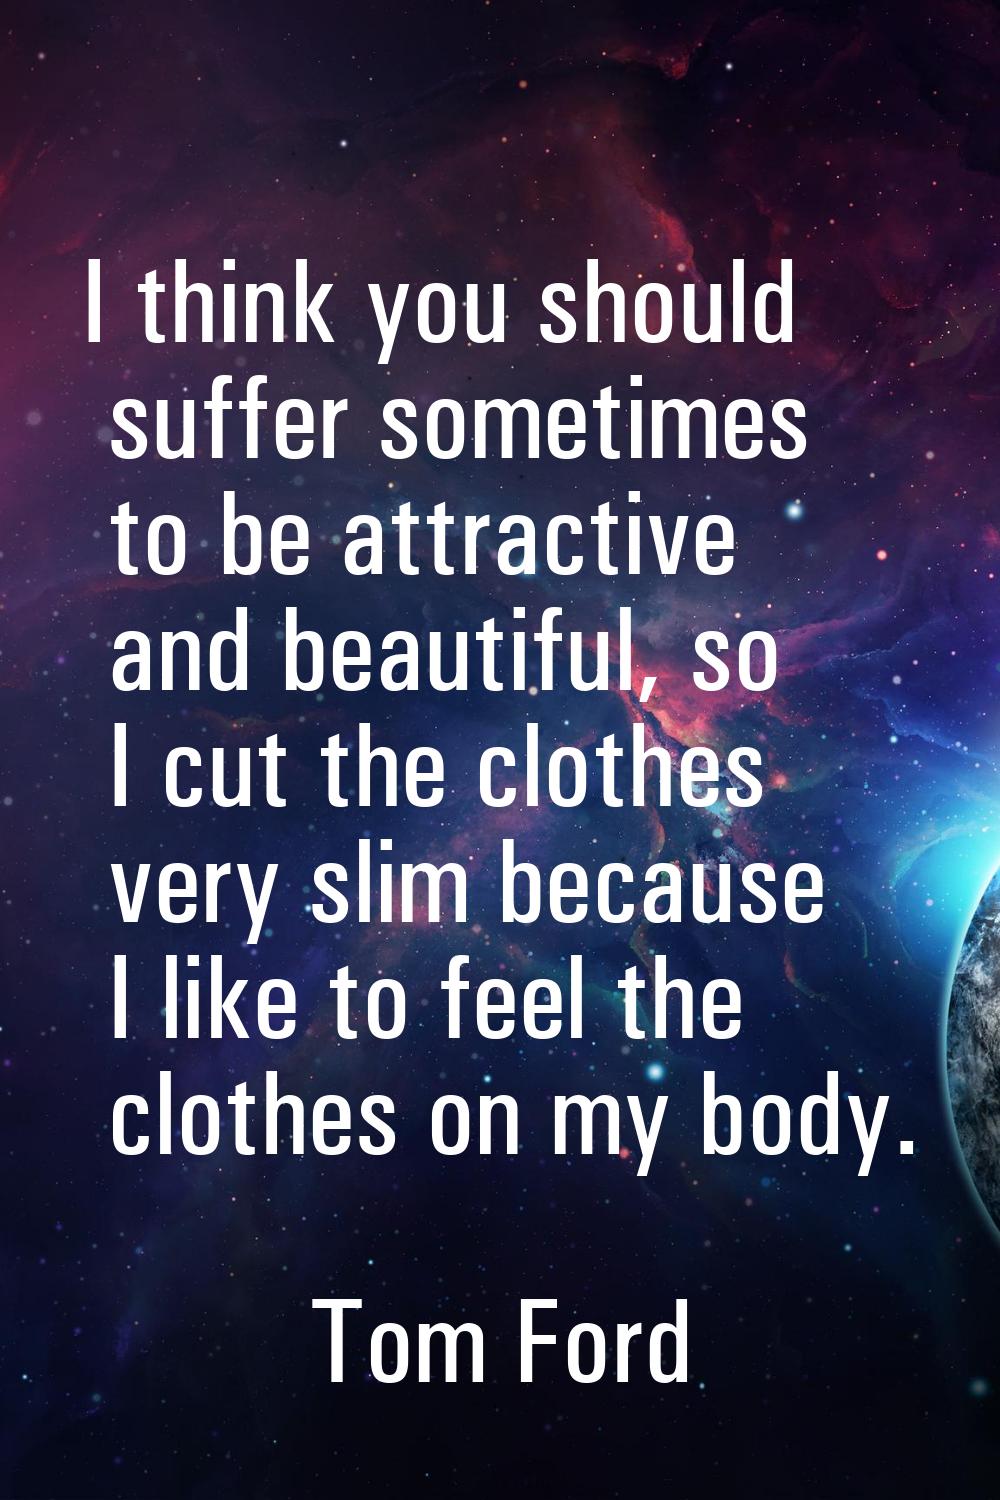 I think you should suffer sometimes to be attractive and beautiful, so I cut the clothes very slim 